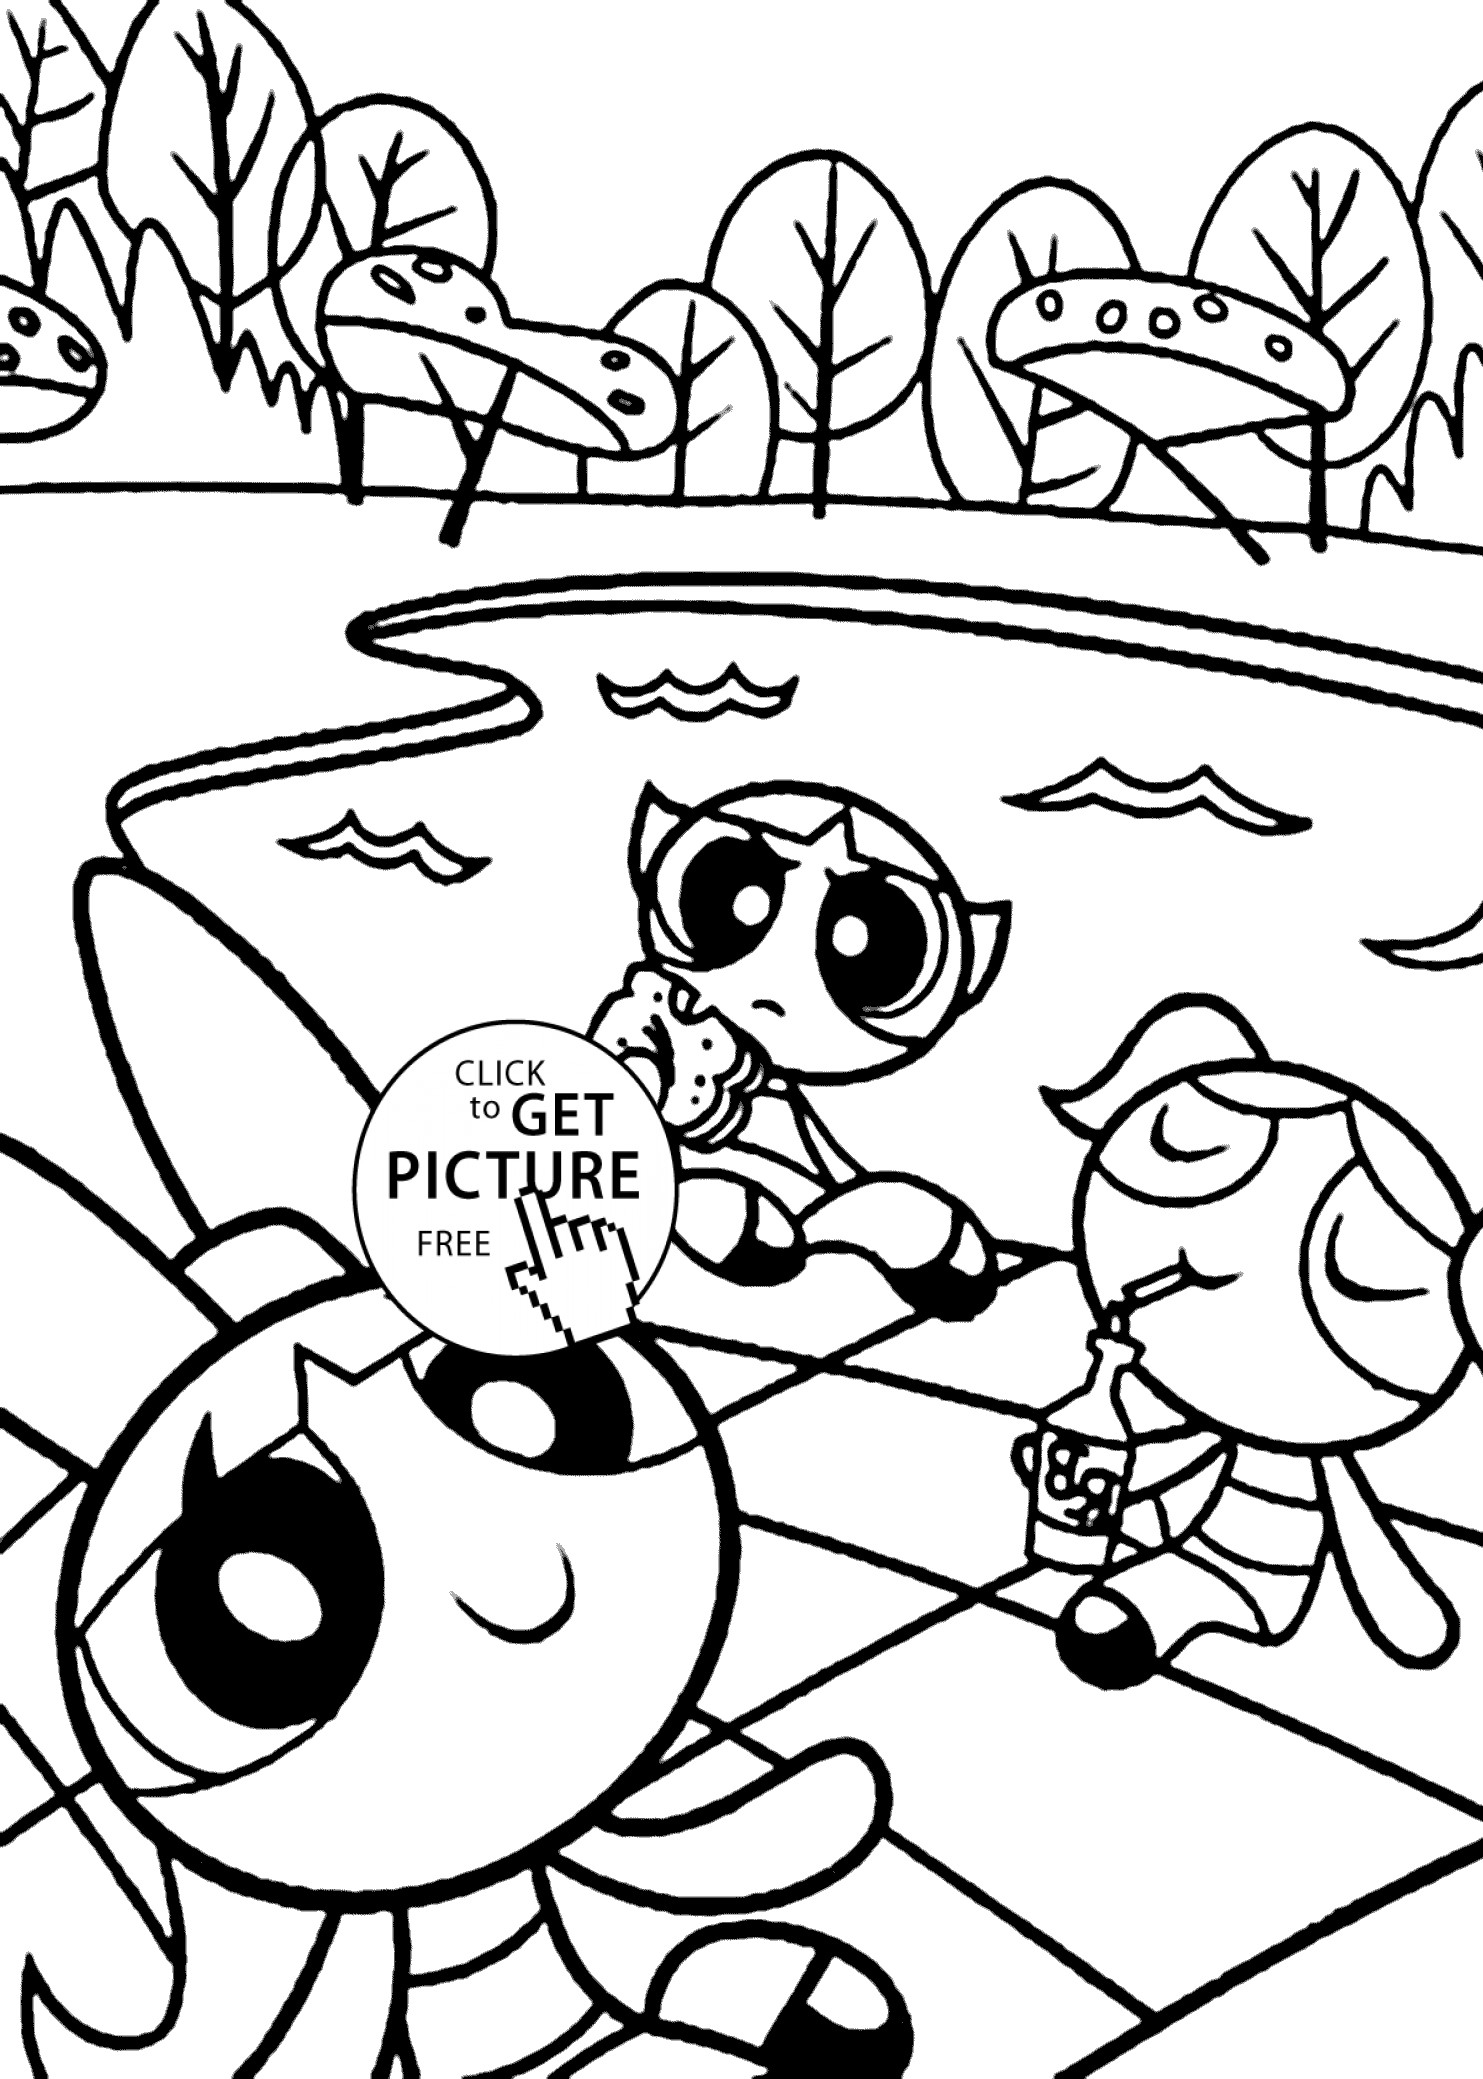 Coloring Pages Powerpuff Girls
 Powerpuff girls on vacation coloring pages for kids